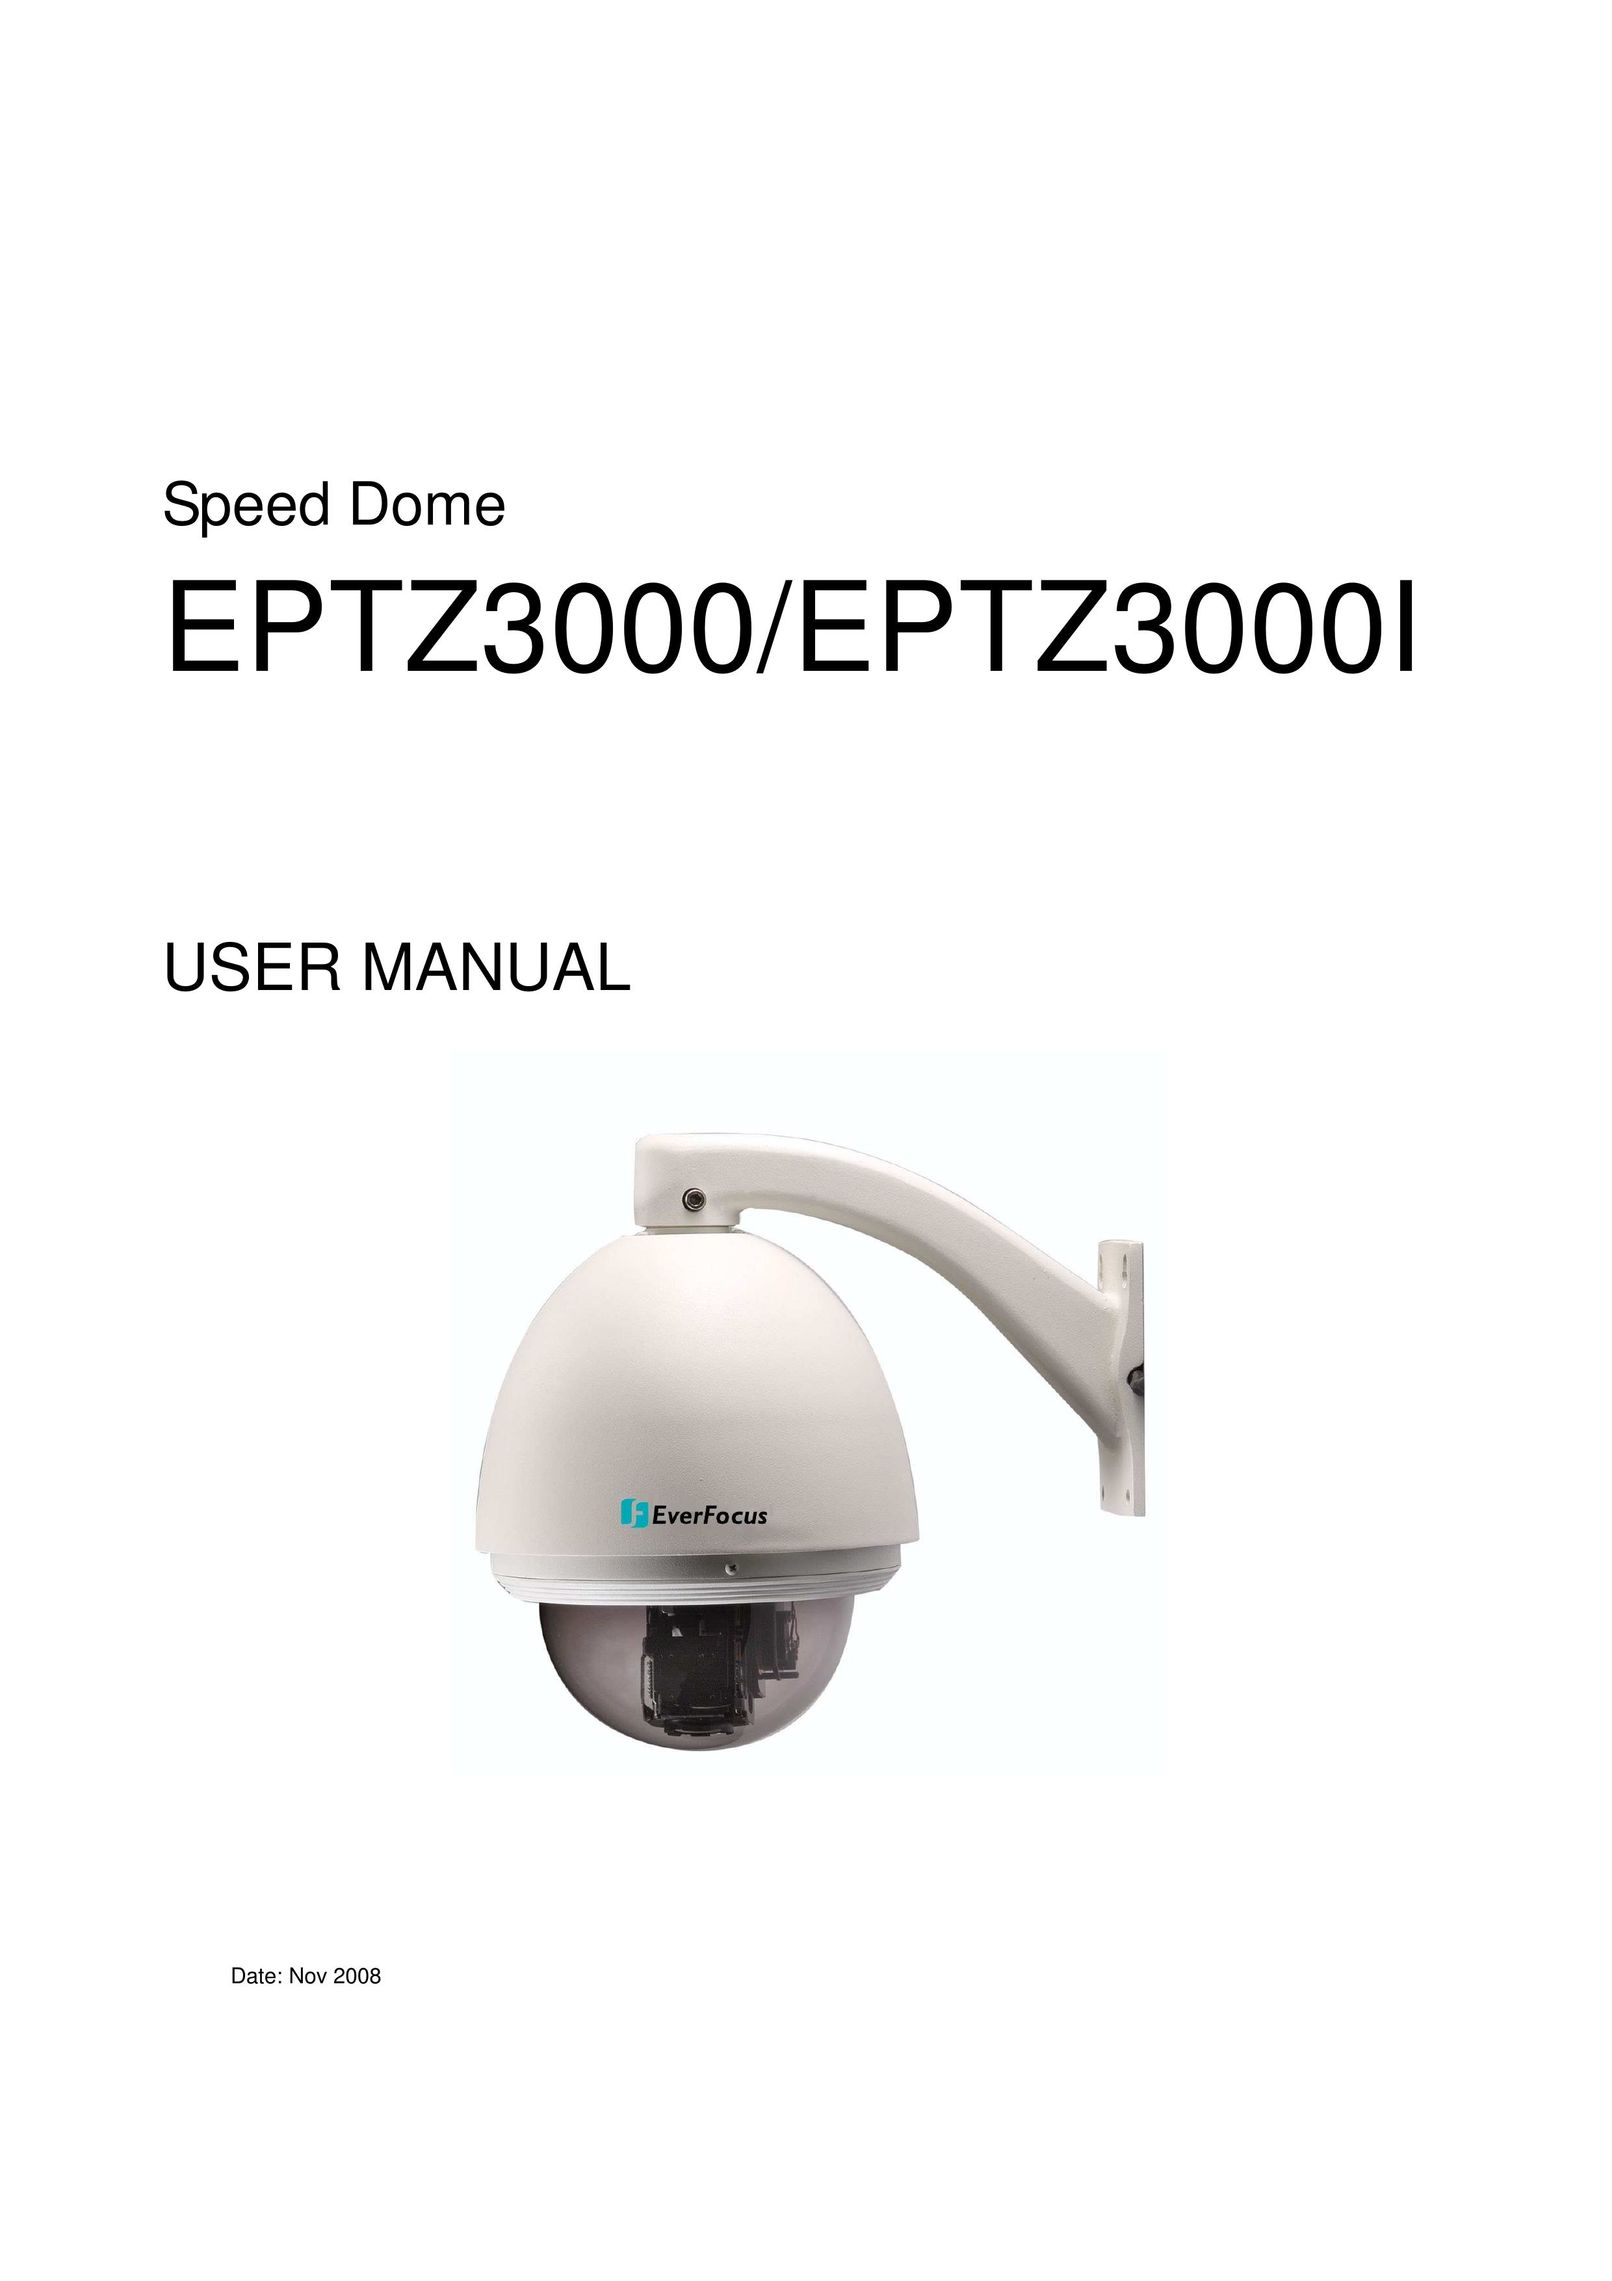 EverFocus Eptz3000 Home Security System User Manual